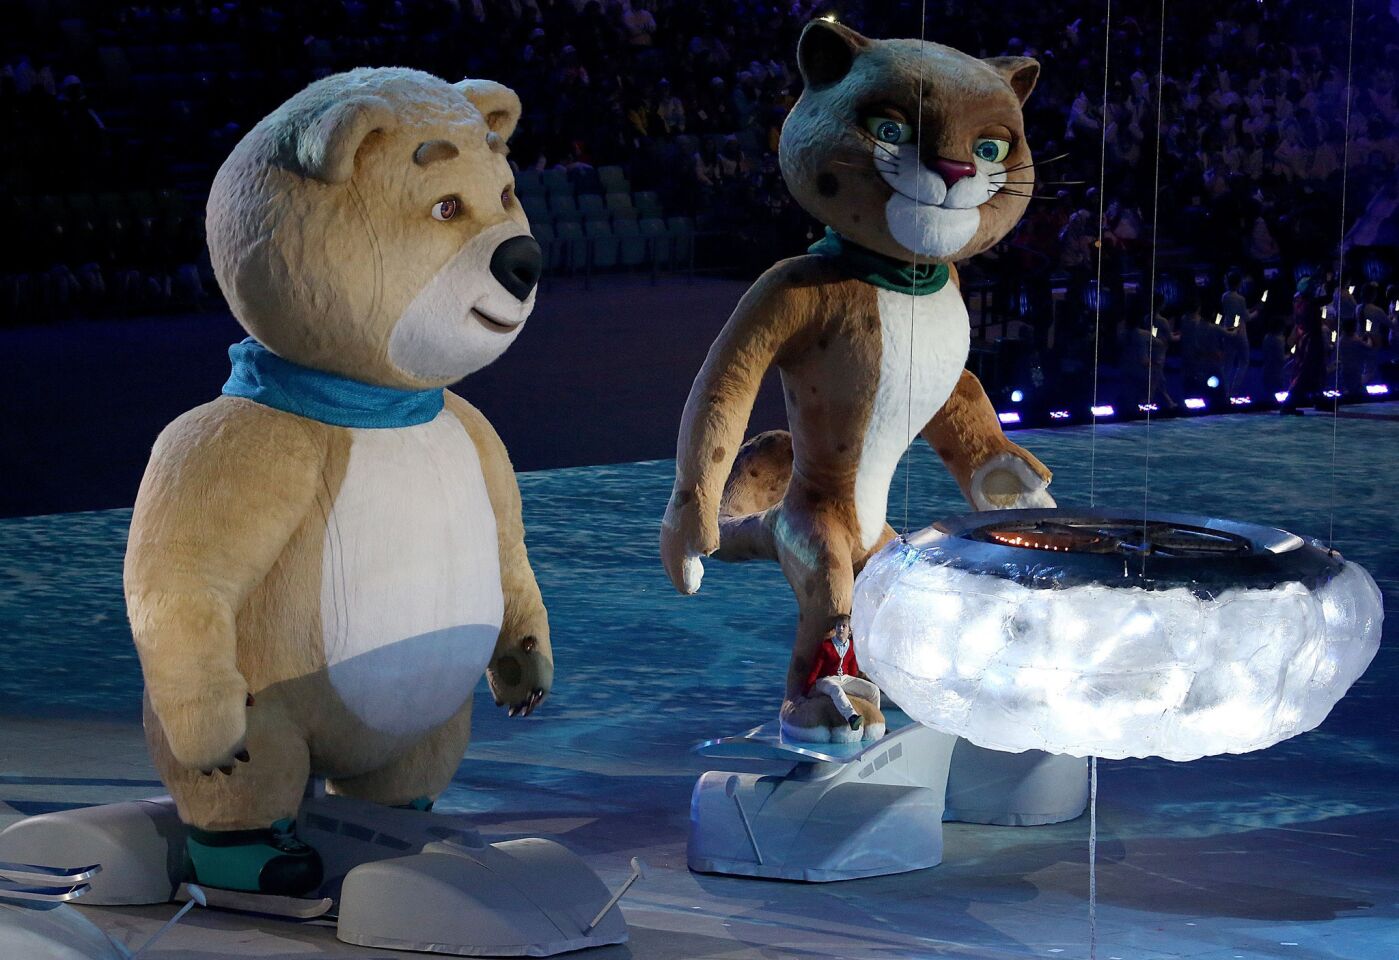 The Sochi Olympics mascots appear during the 2014 Winter Olympics Closing Ceremony.